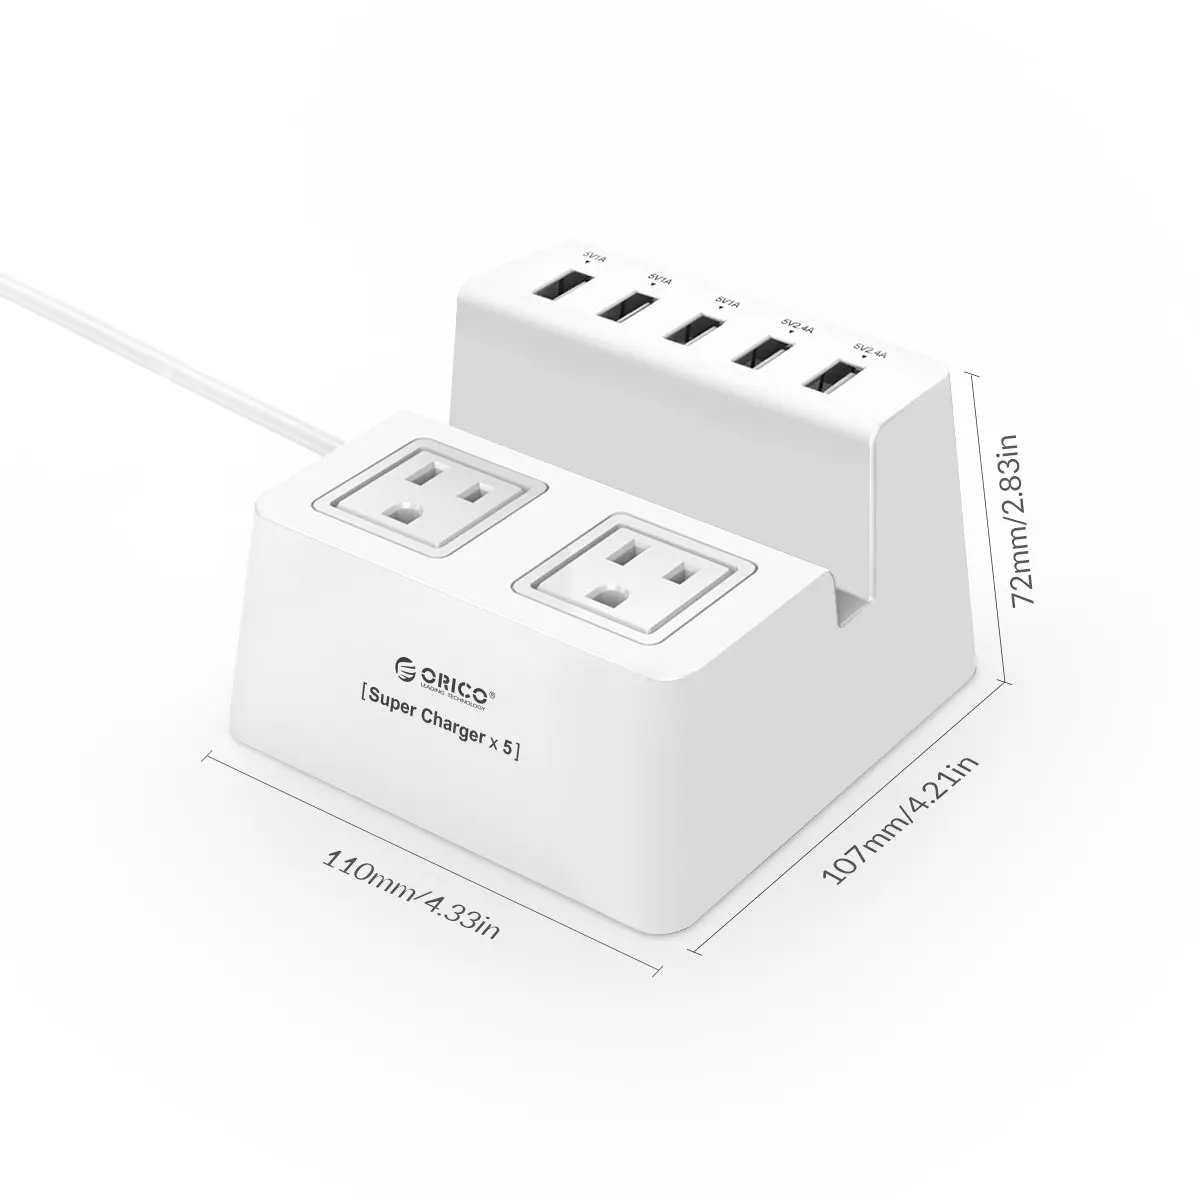 surge protector with 5 usb ports AC power socket with 2 AC outlet power strip